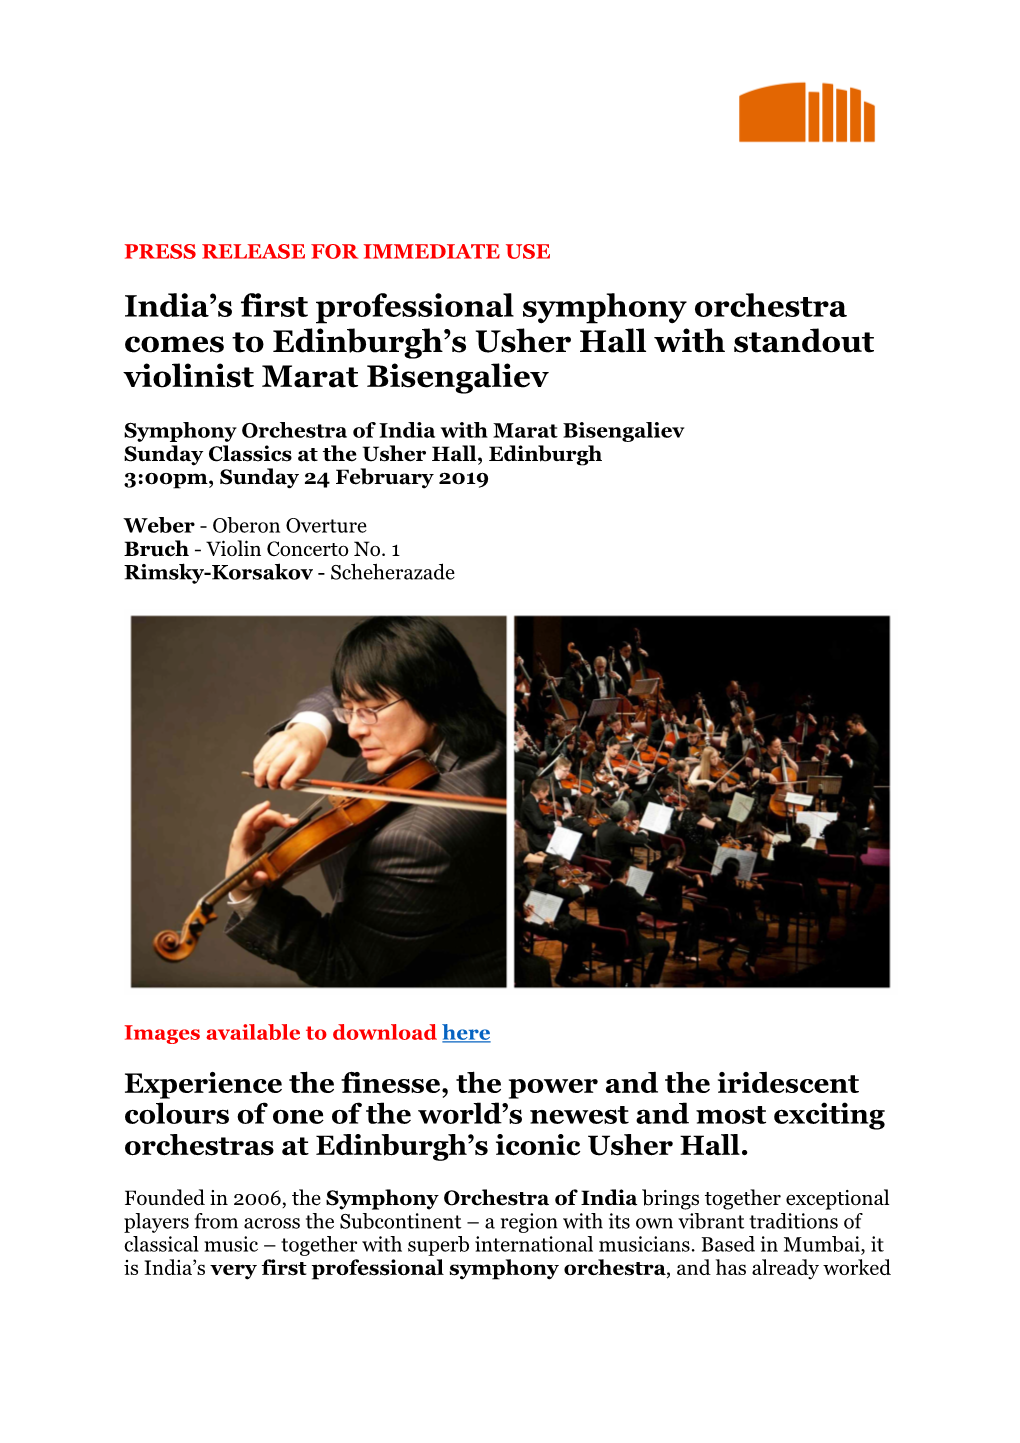 India's First Professional Symphony Orchestra Comes to Edinburgh's